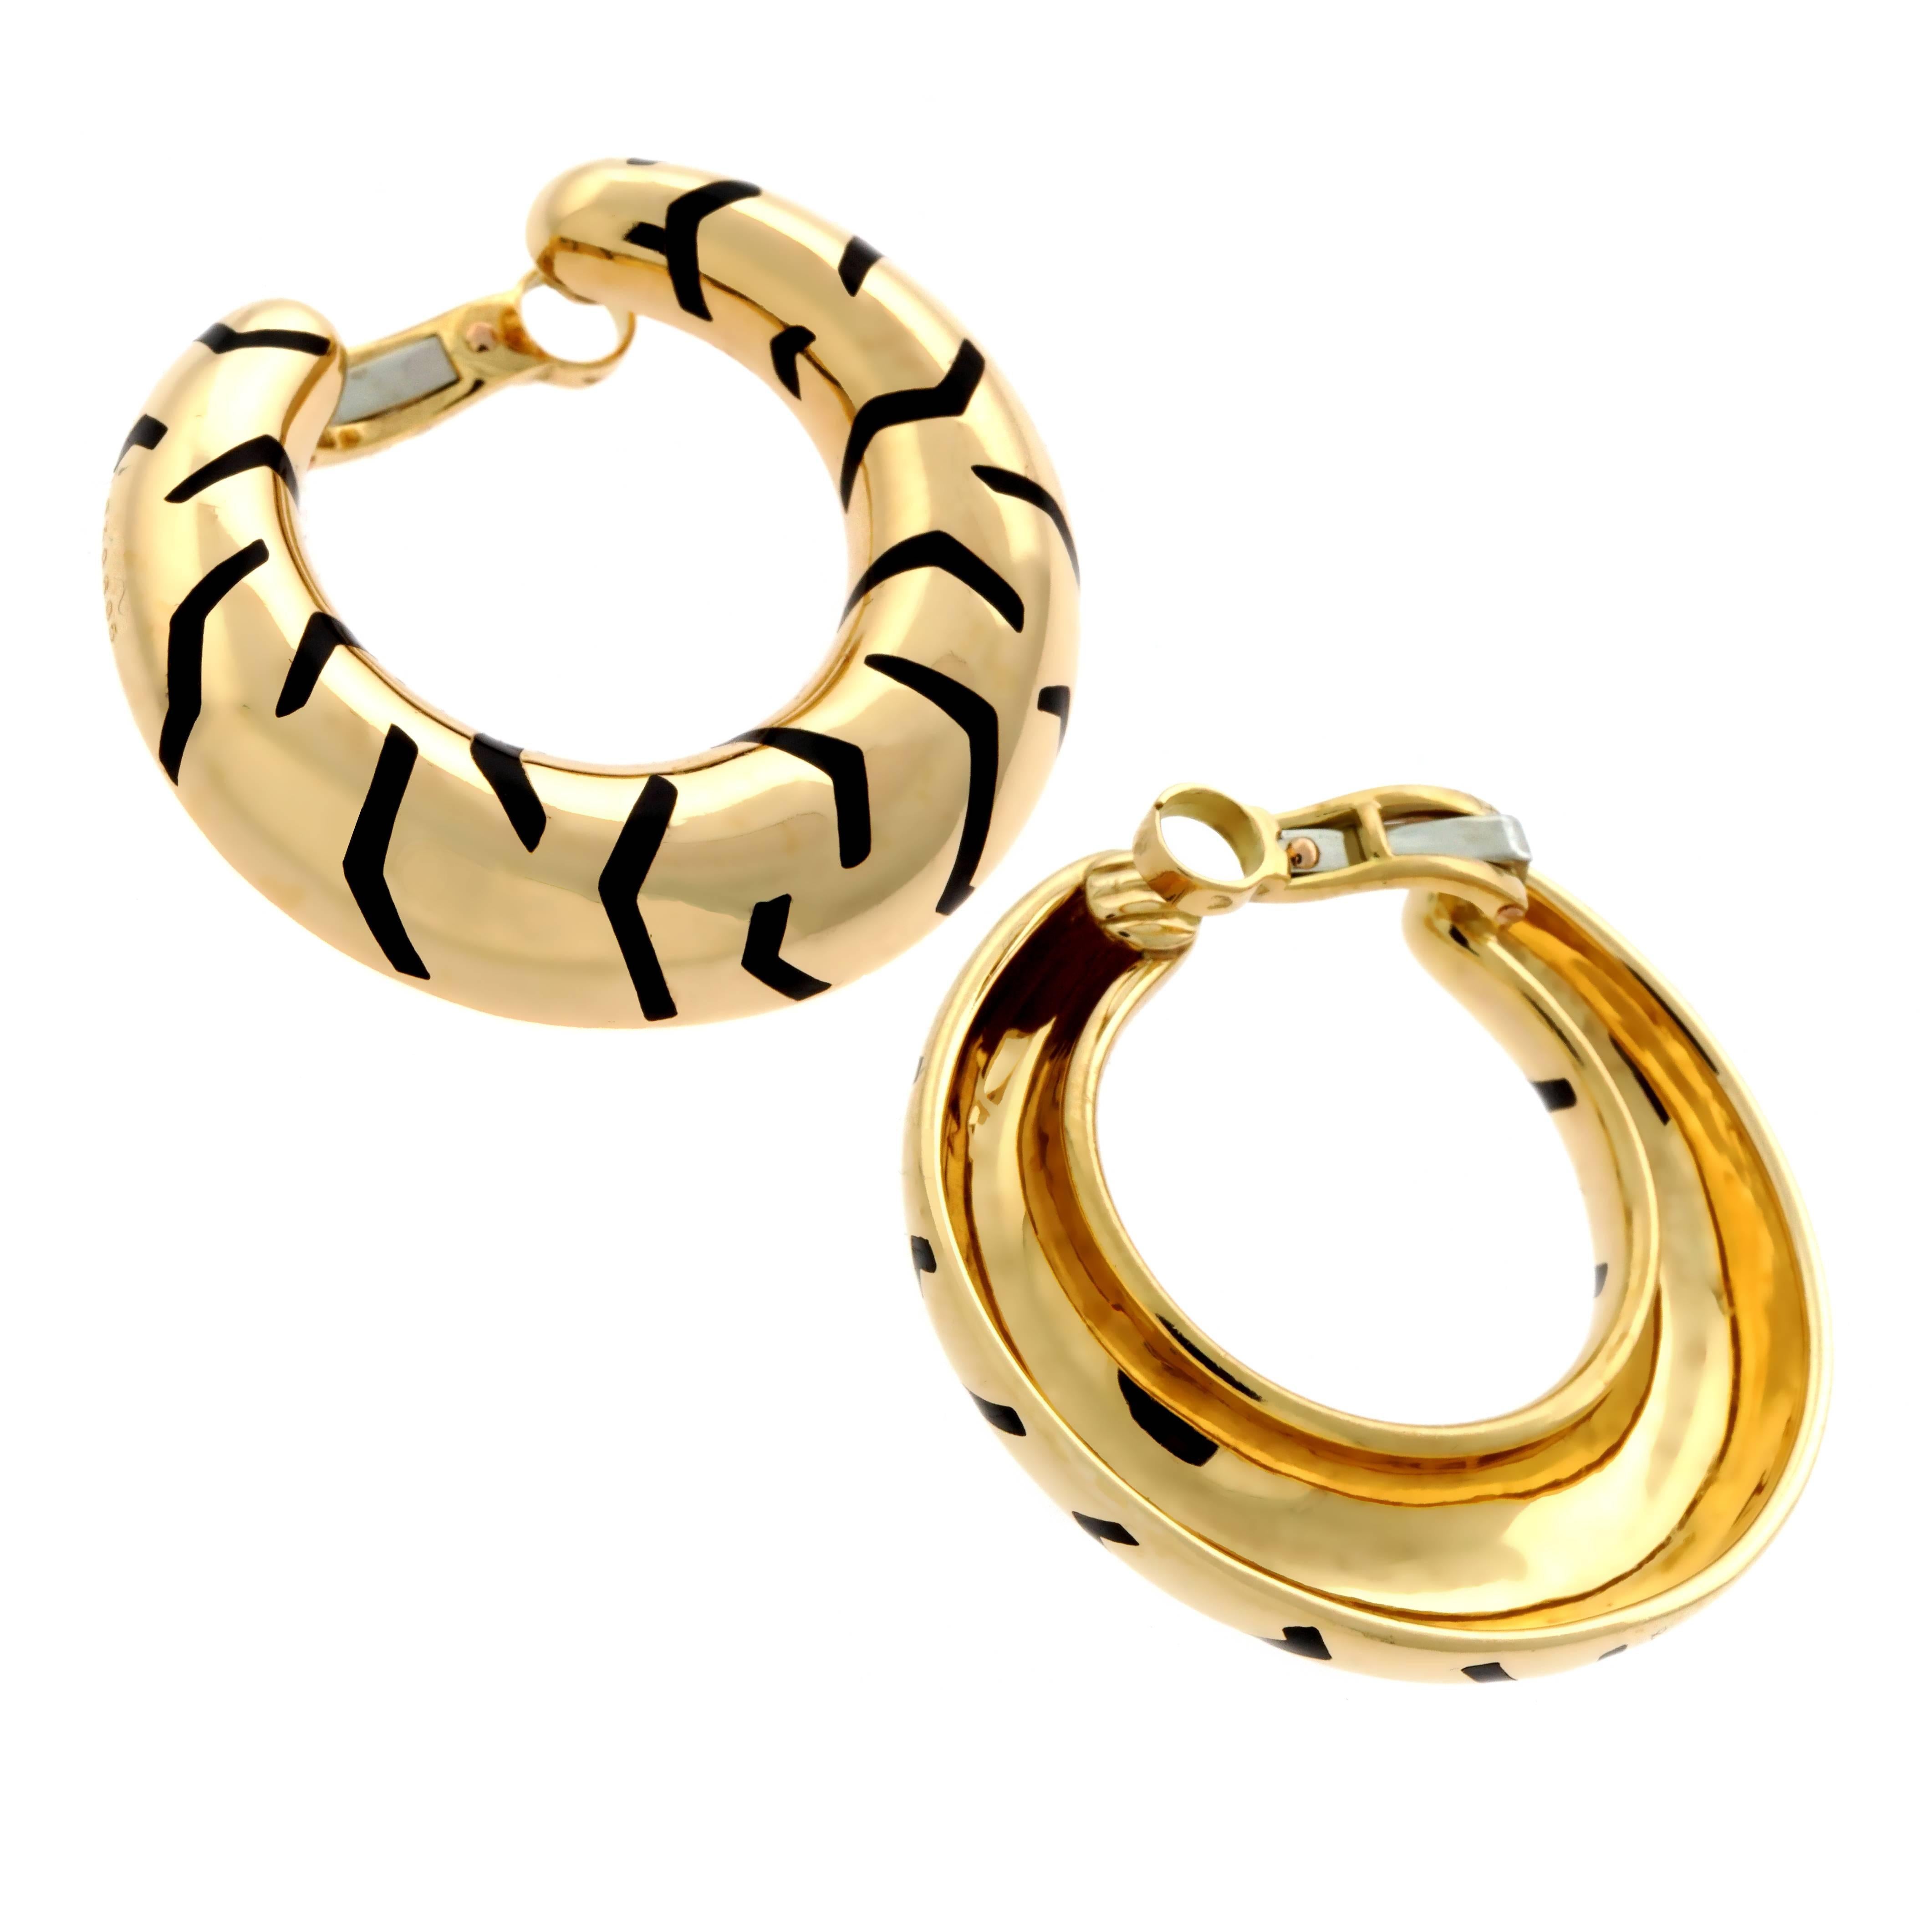 A highly collectible pair of authentic Cartier Tiger stripe earrings from the 1990's featuring the iconic Tiger stripe motif set with enamel in 18k yellow gold.

The earrings measure 1.45